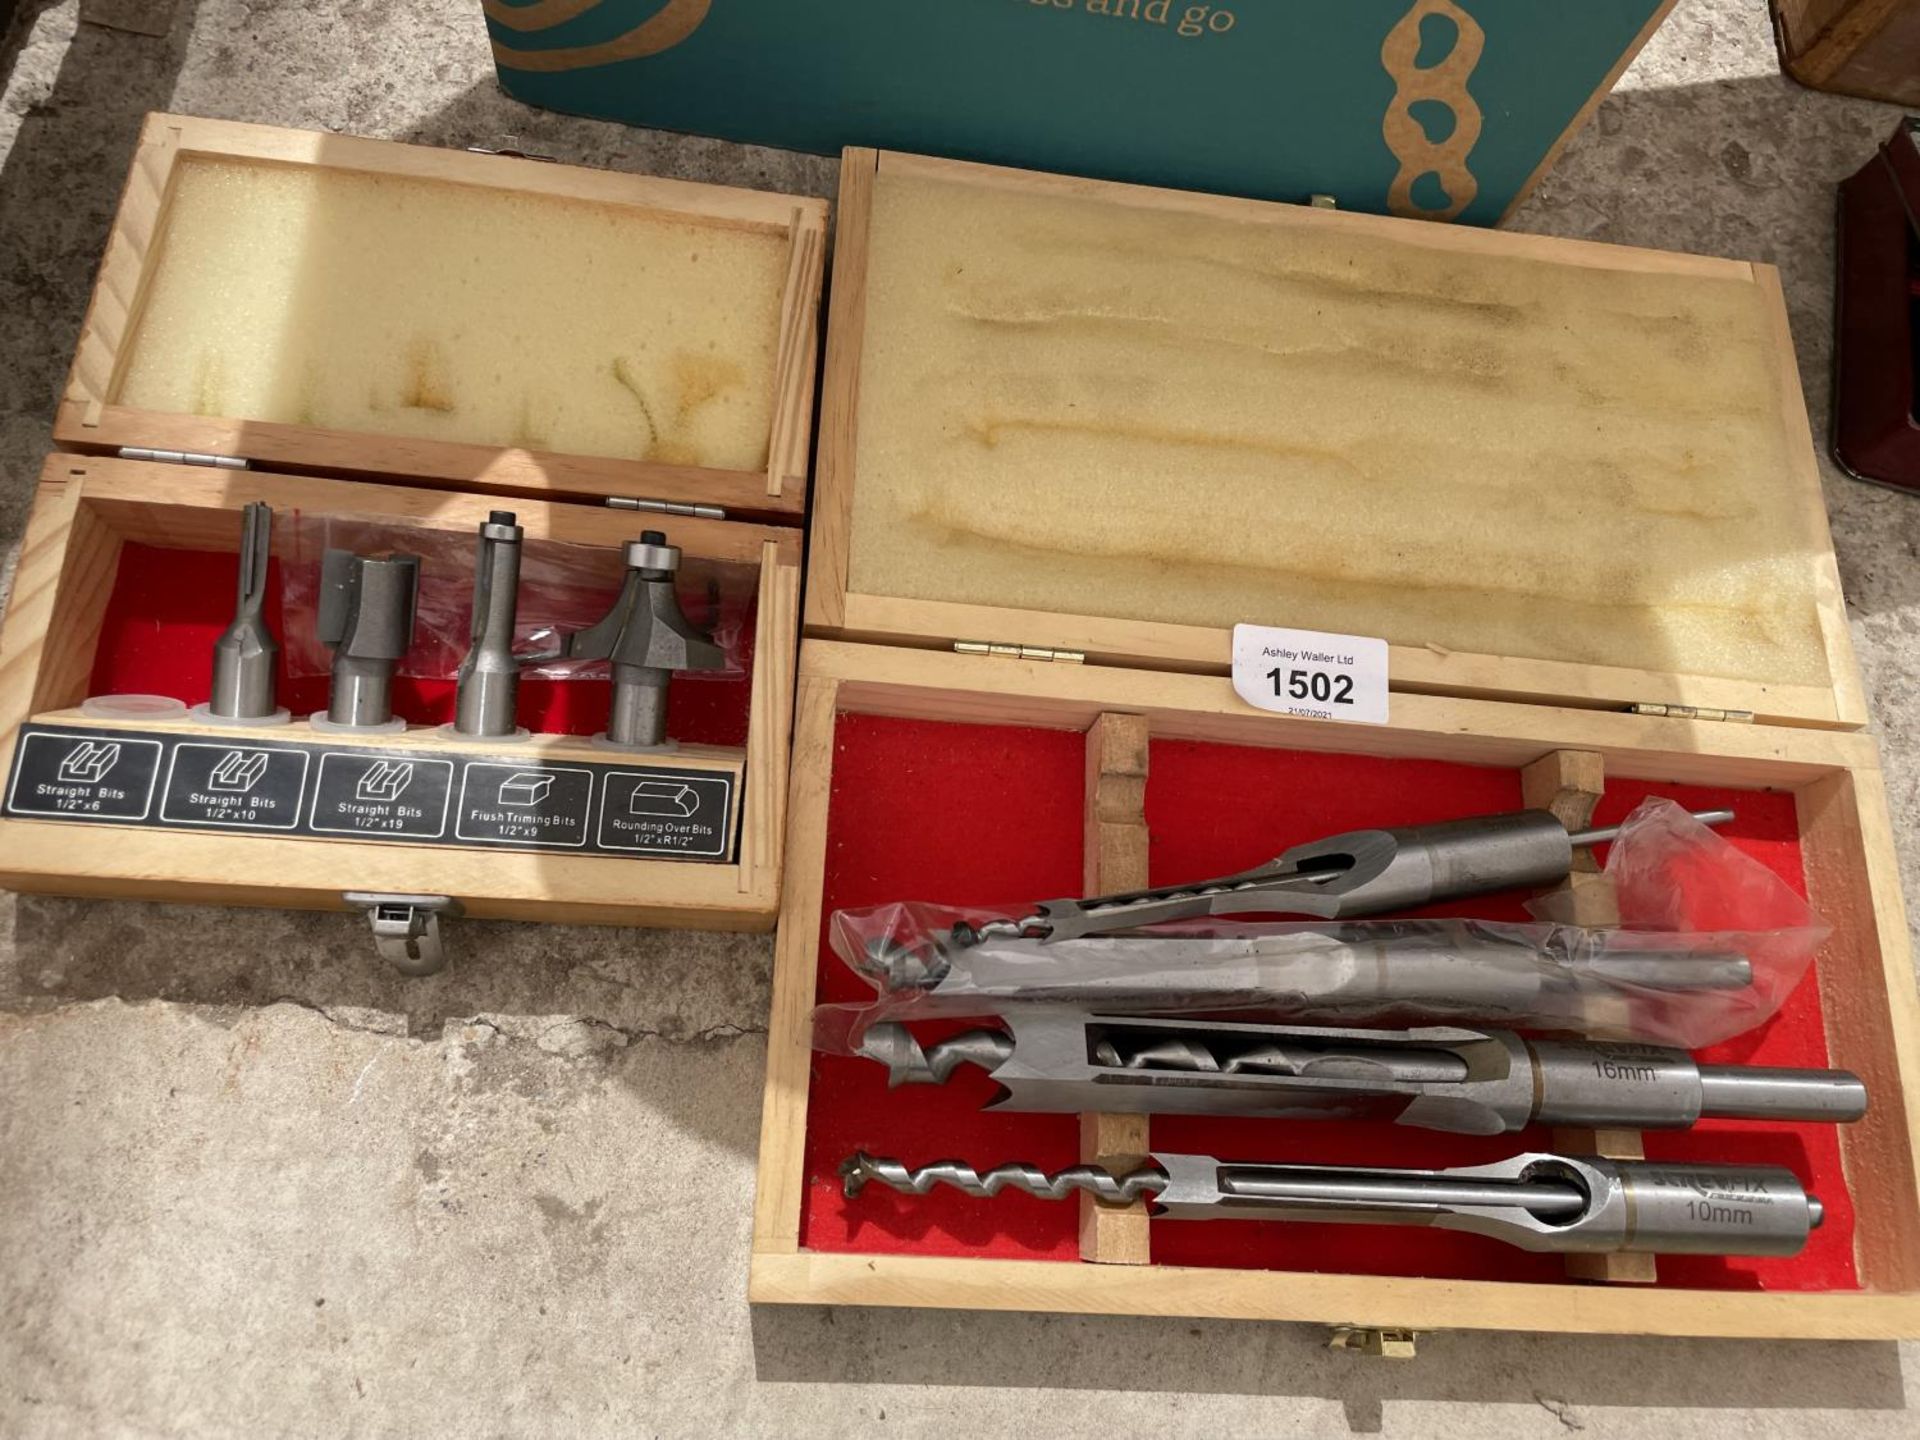 AN ASSORTMENT OF MORTISE DRILL BITS AND LATHE TOOLS - Image 5 of 8